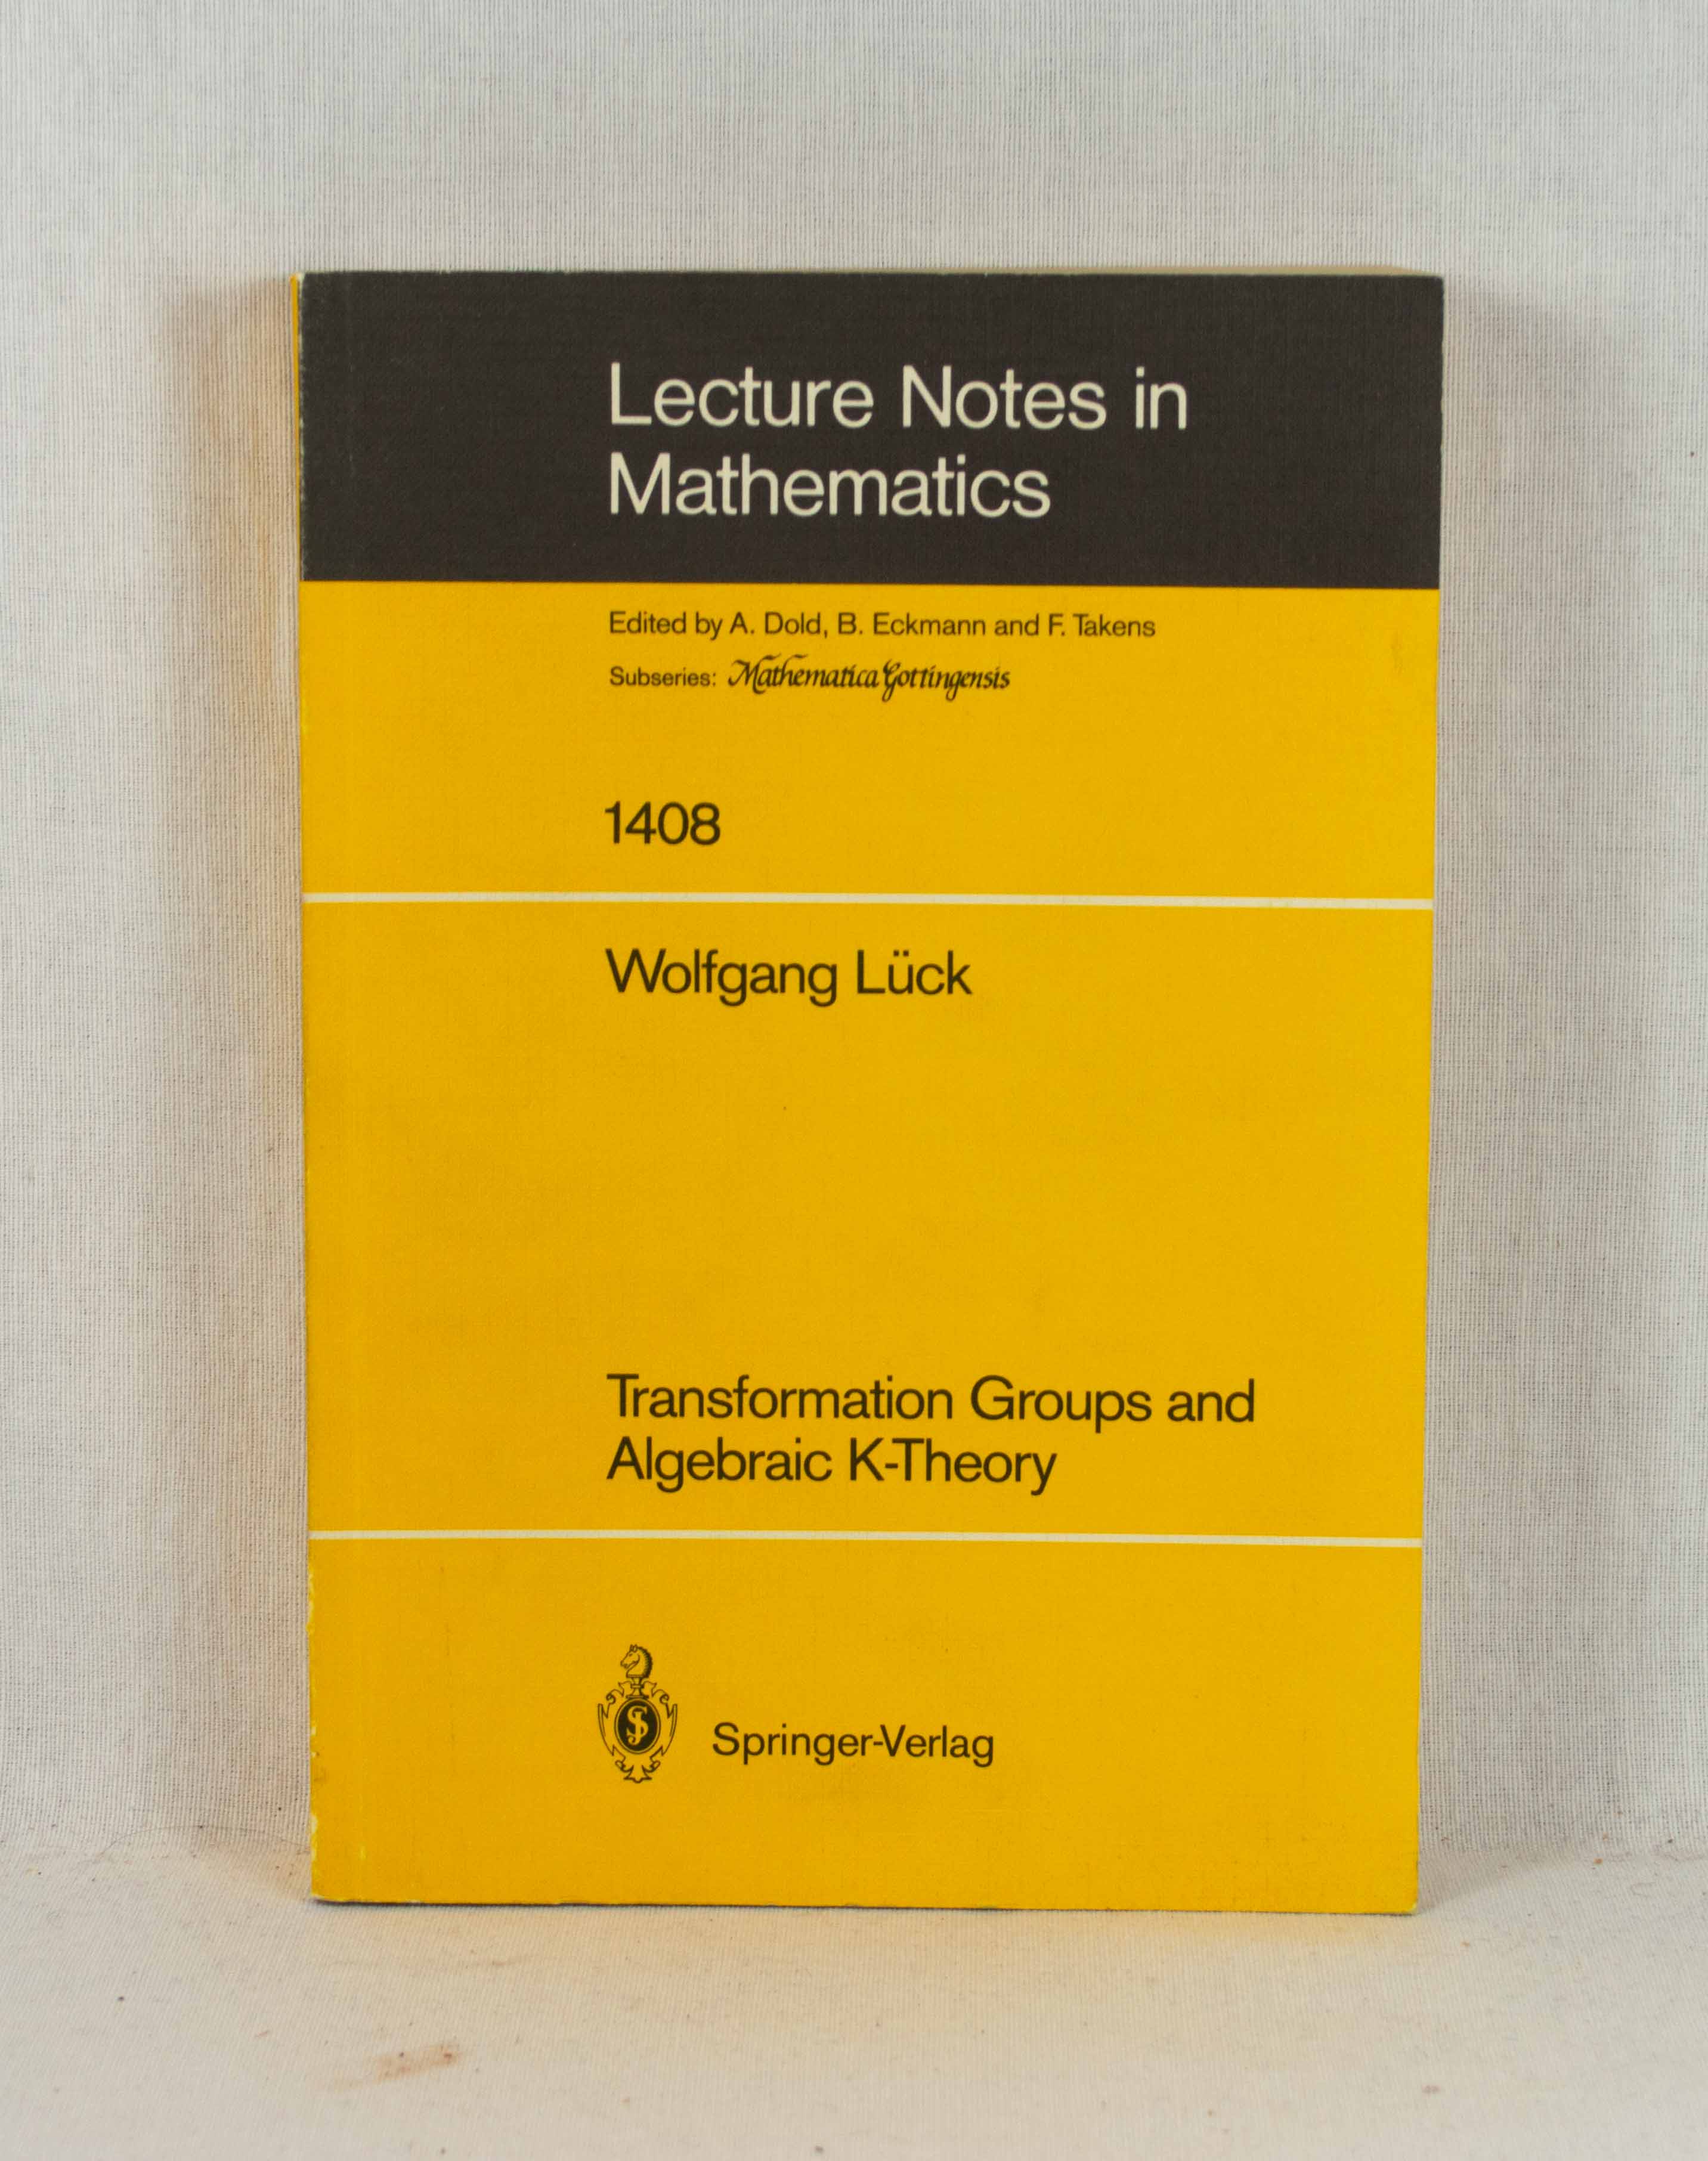 Transformation Groups and Algebraic K-Theory. (= Lecture Notes in Mathematics, Vol. 1408 / Subseries: Mathematica Gottingensis). - Lück, Wolfgang